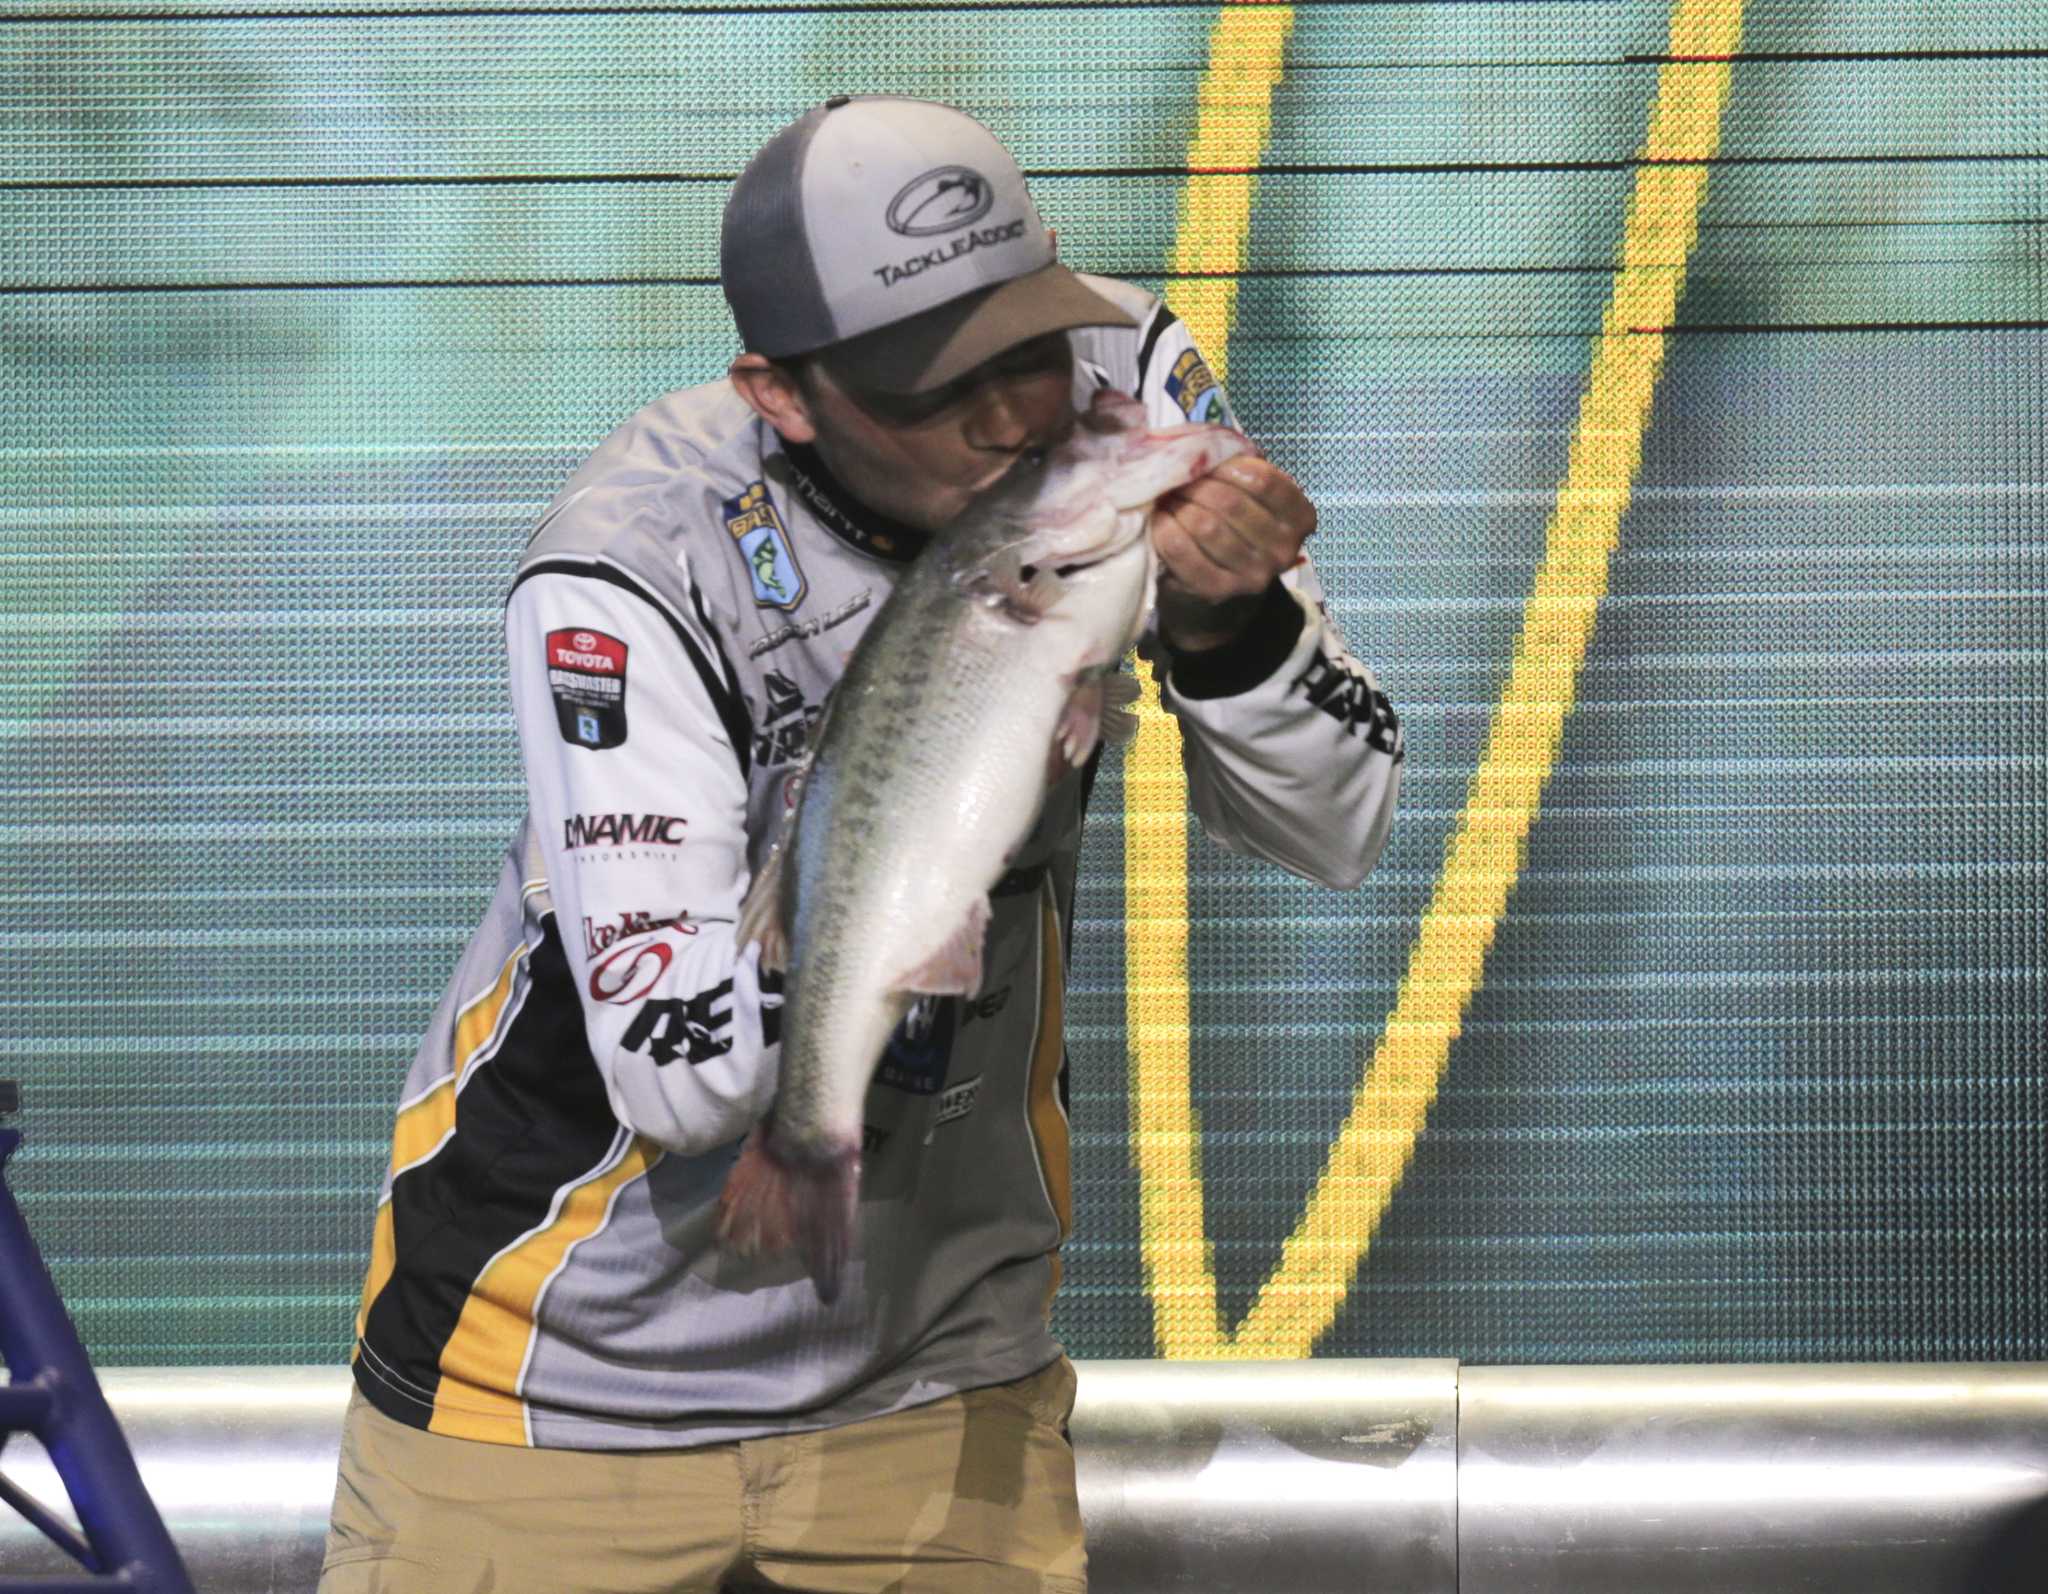 FISHING Complete results from Day 2 of Bassmaster Classic